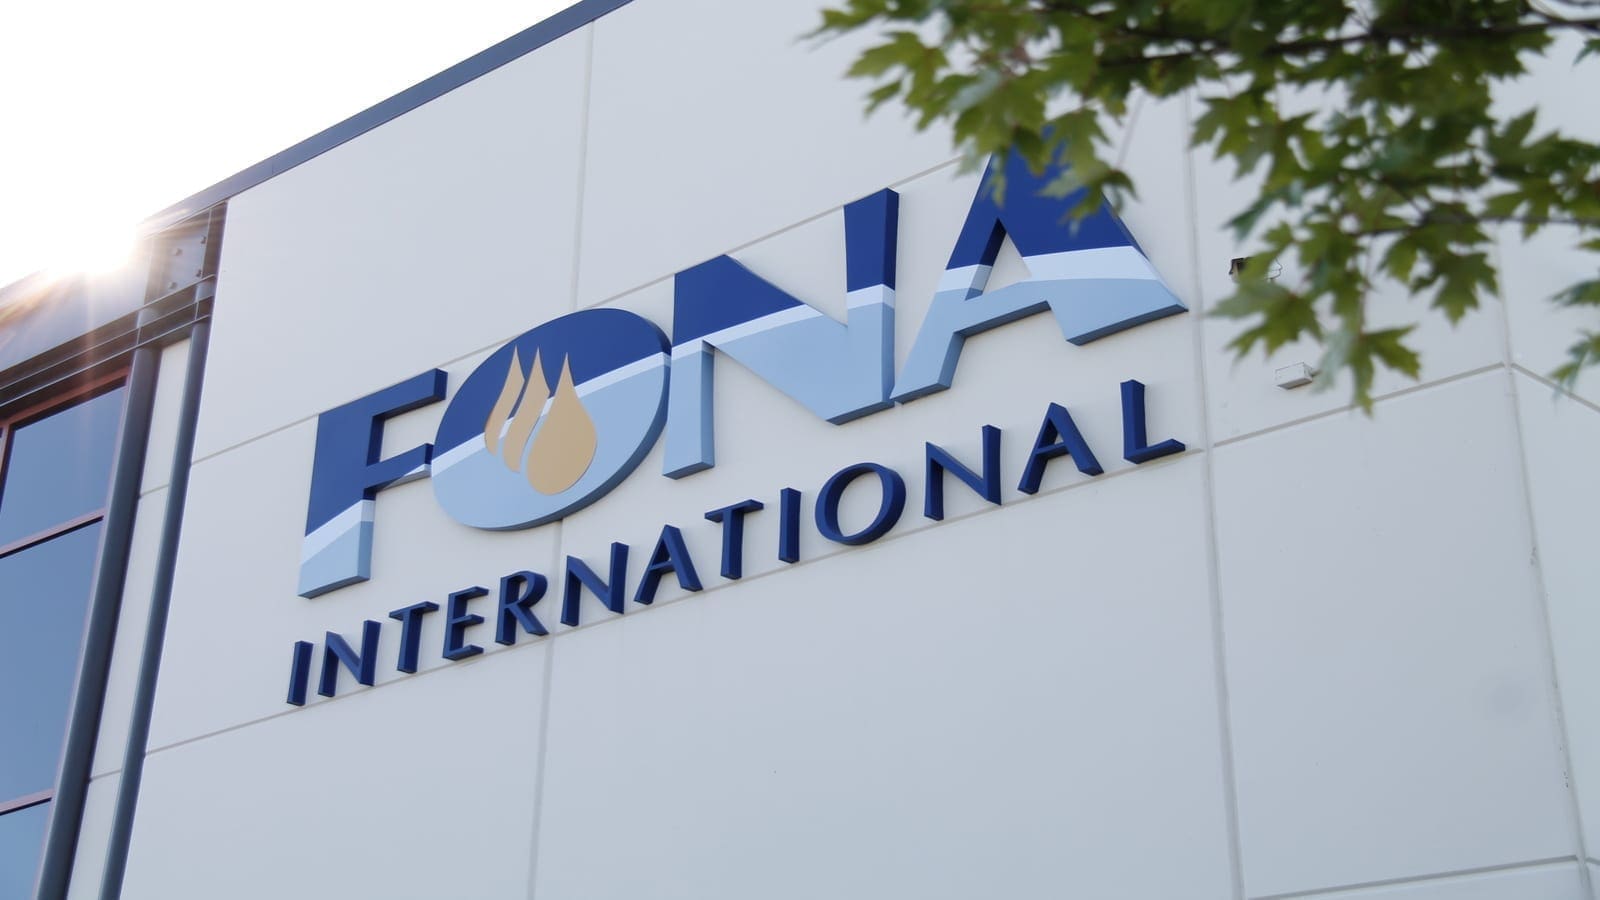 American food ingredients company McCormick acquires maker of clean and natural flavours Fona International for US$710m